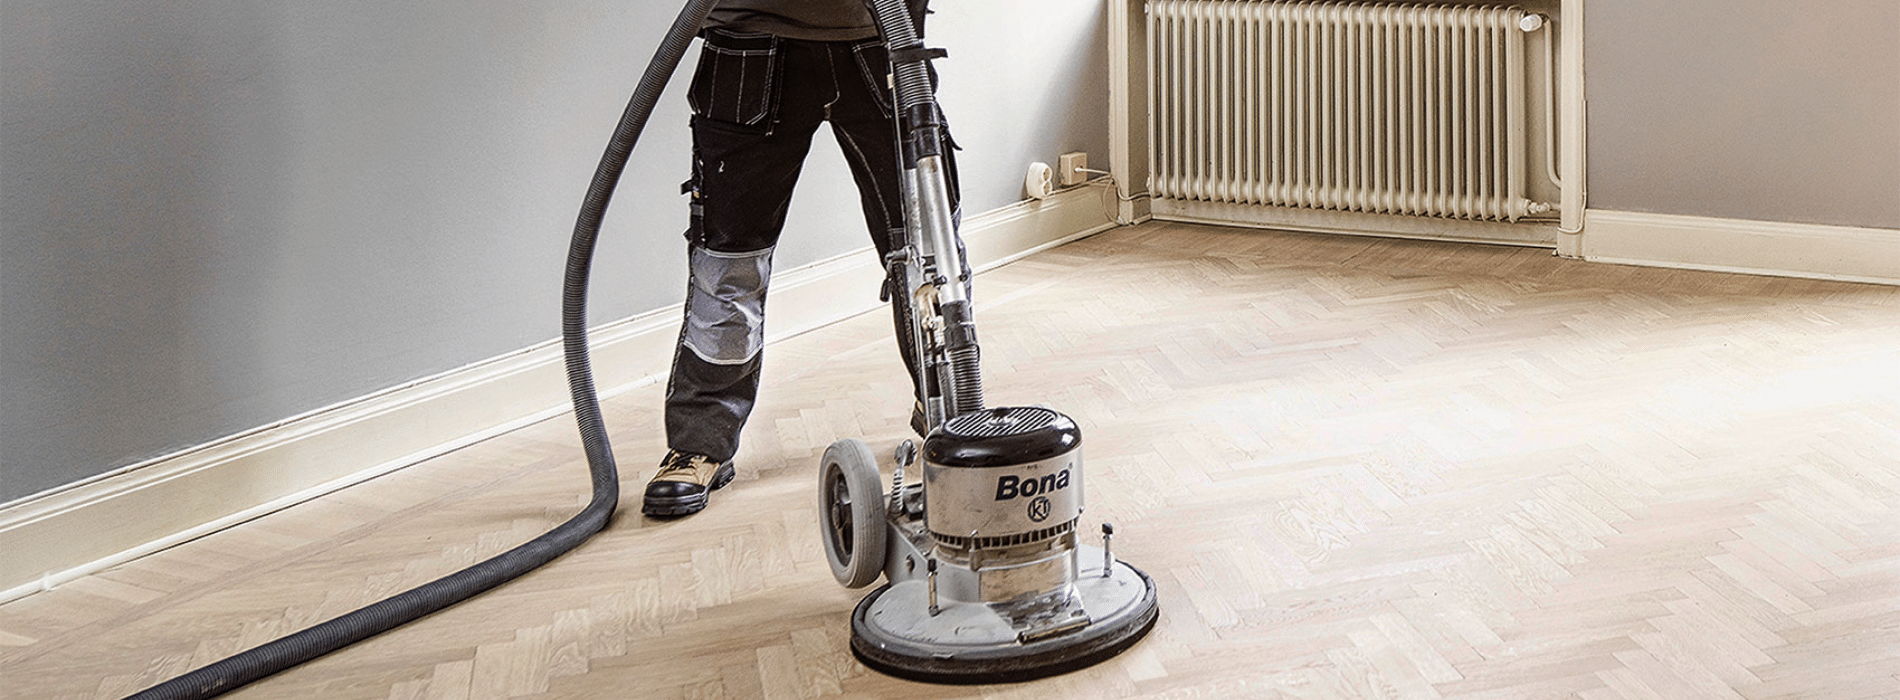 In Stoke Newington, N16, Mr Sander® skillfully sanding a herringbone floor with the powerful Effect 2200 Bona belt sander (250x650 mm). Our dust extraction system with HEPA filter ensures a clean and efficient outcome.